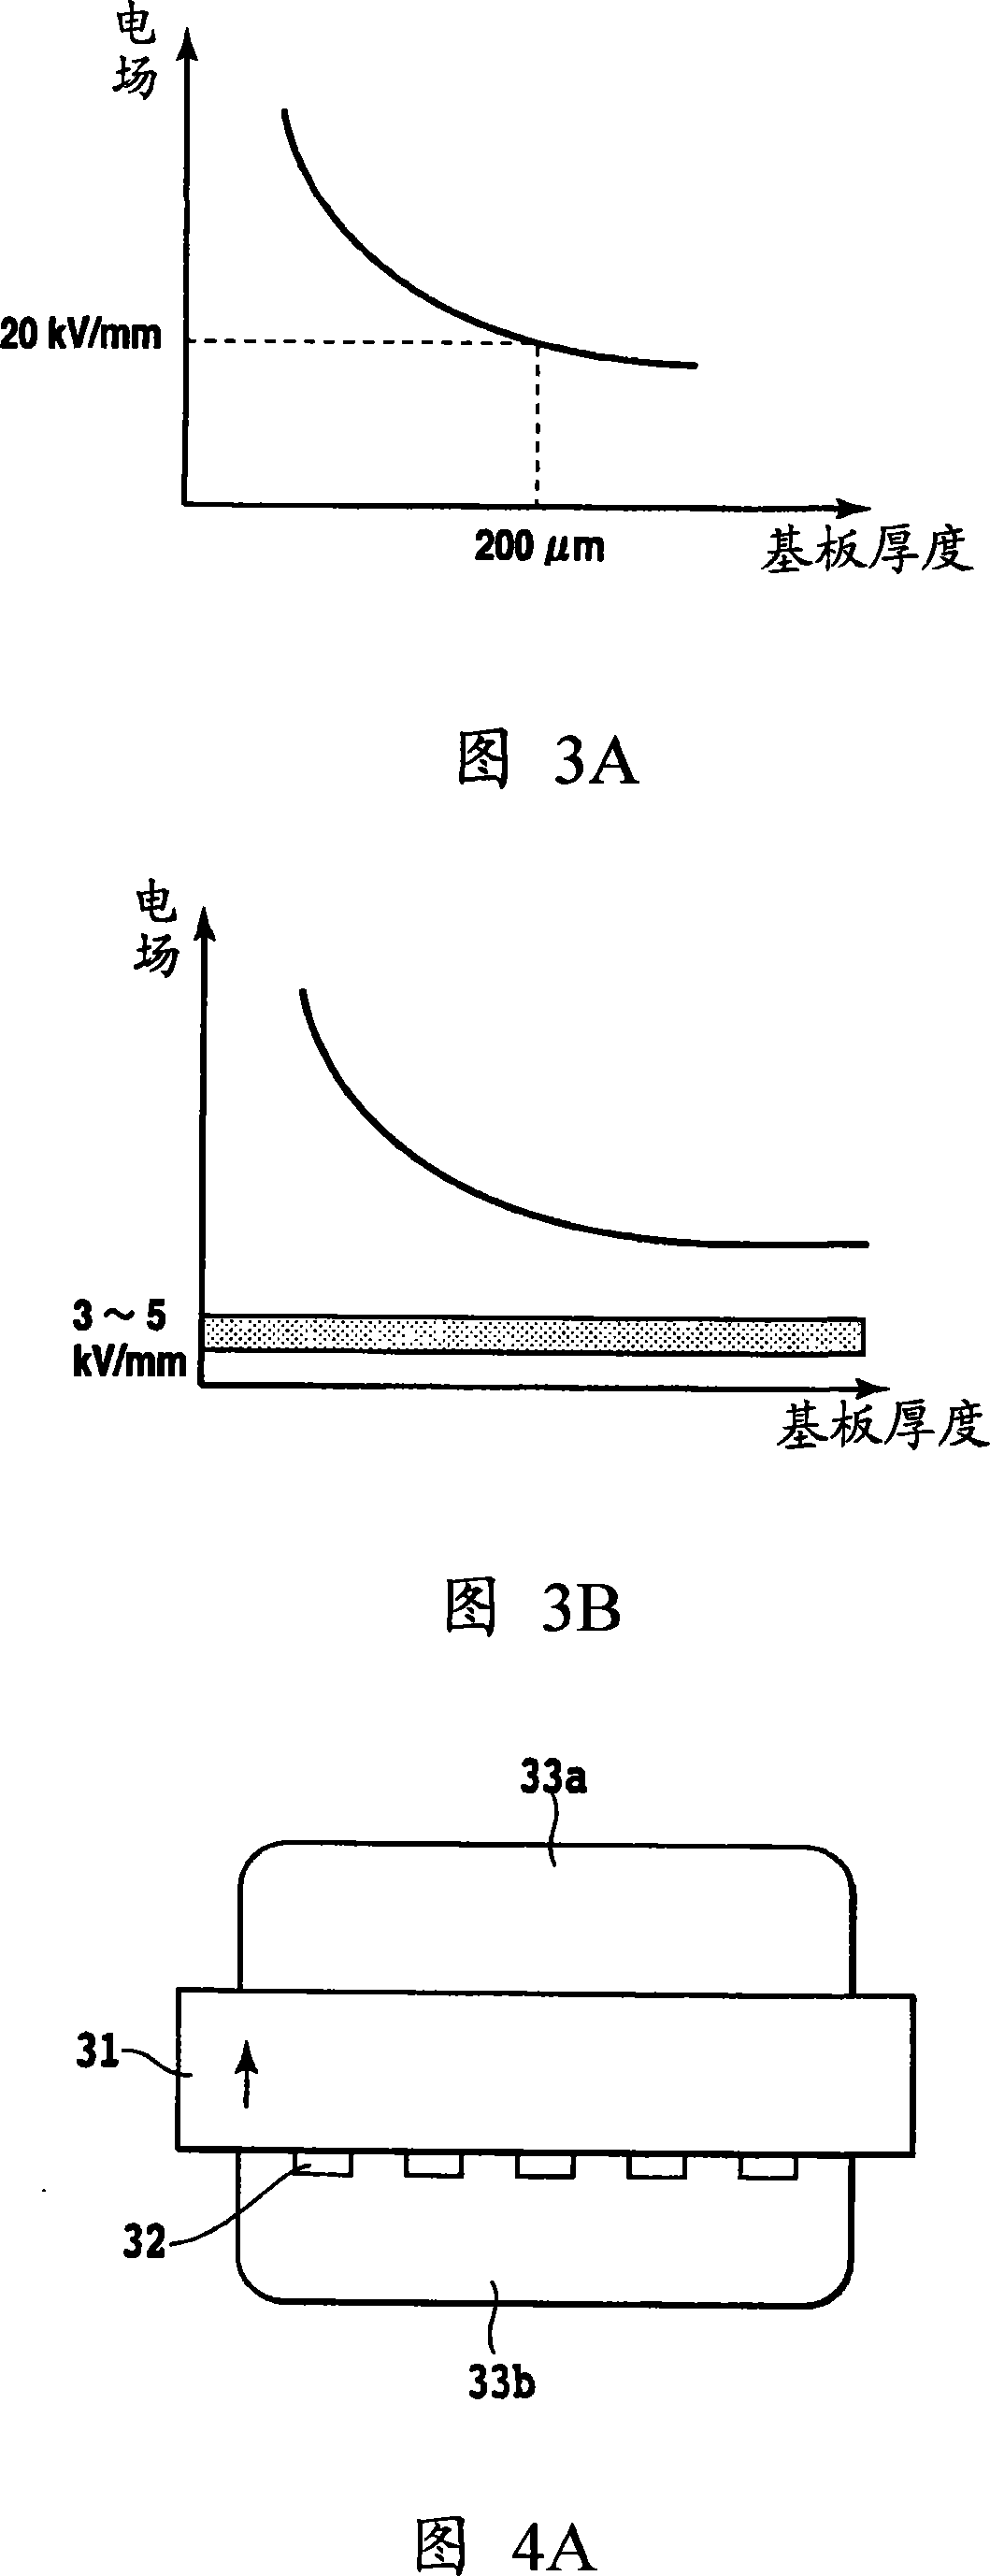 Method for manufacturing a periodically-poled structure